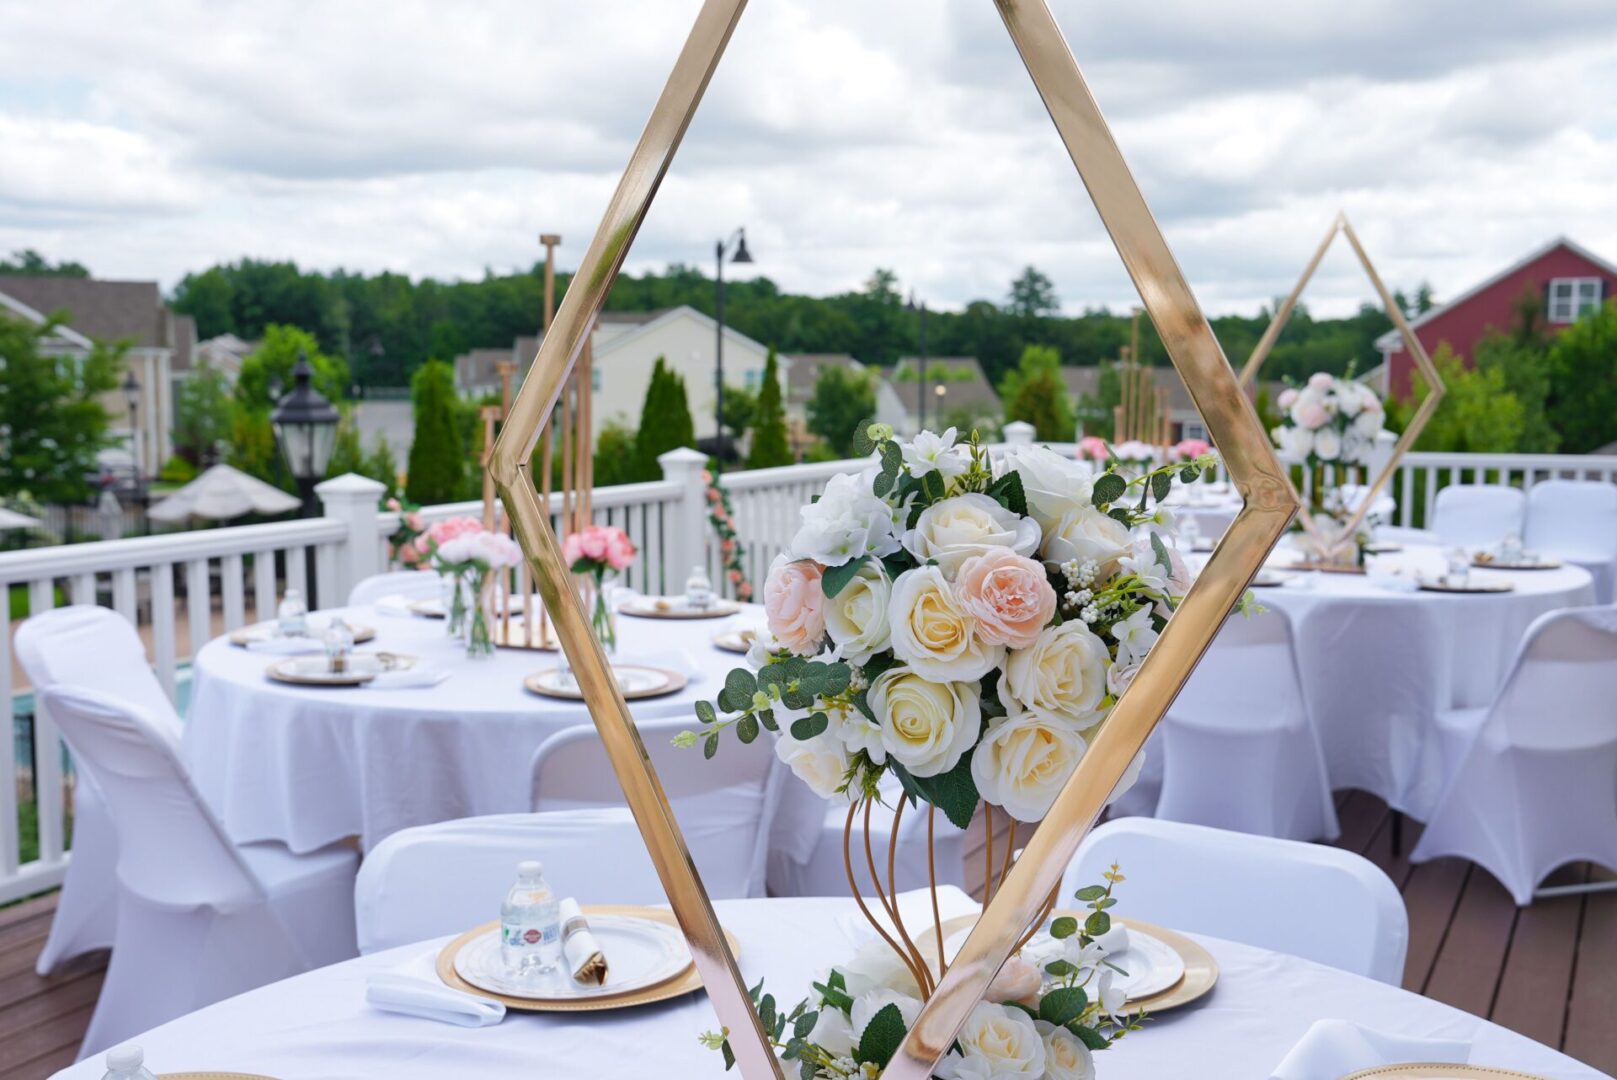 A table with white tables and gold plates